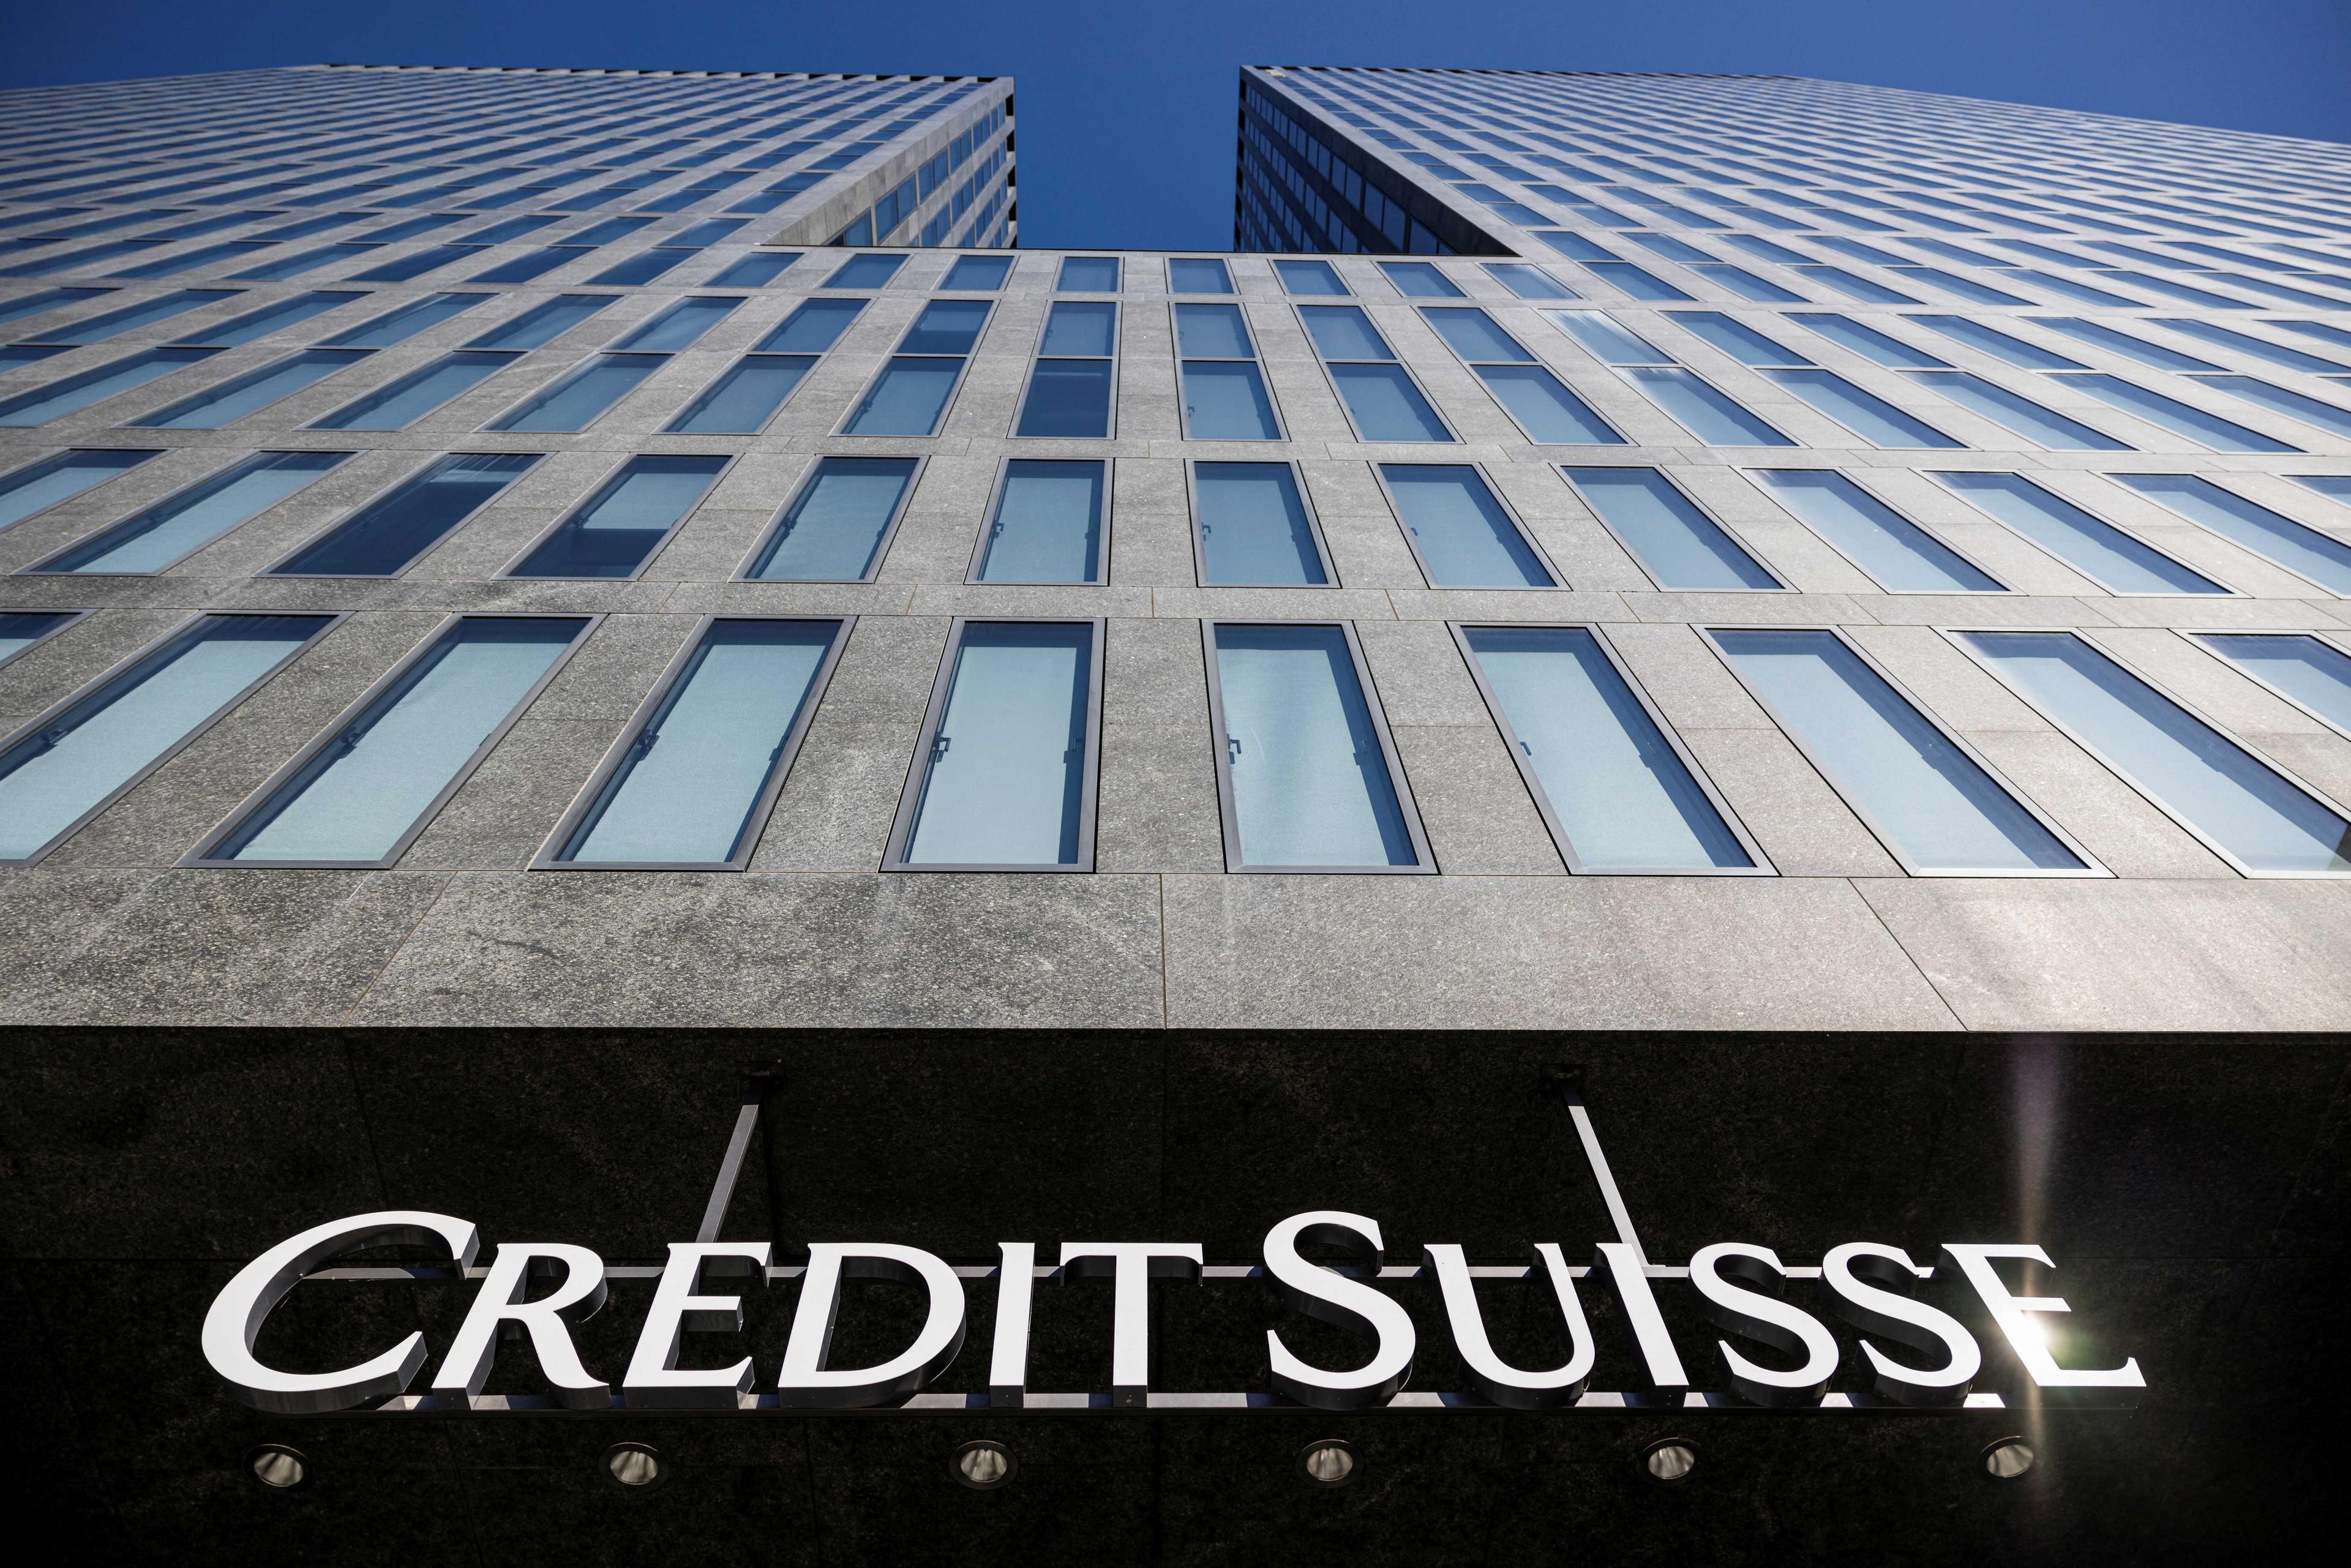 The logo of Credit Suisse is pictured on a building near the Hallenstadion, in Zurich, Switzerland, April 4. Photo: Reuters